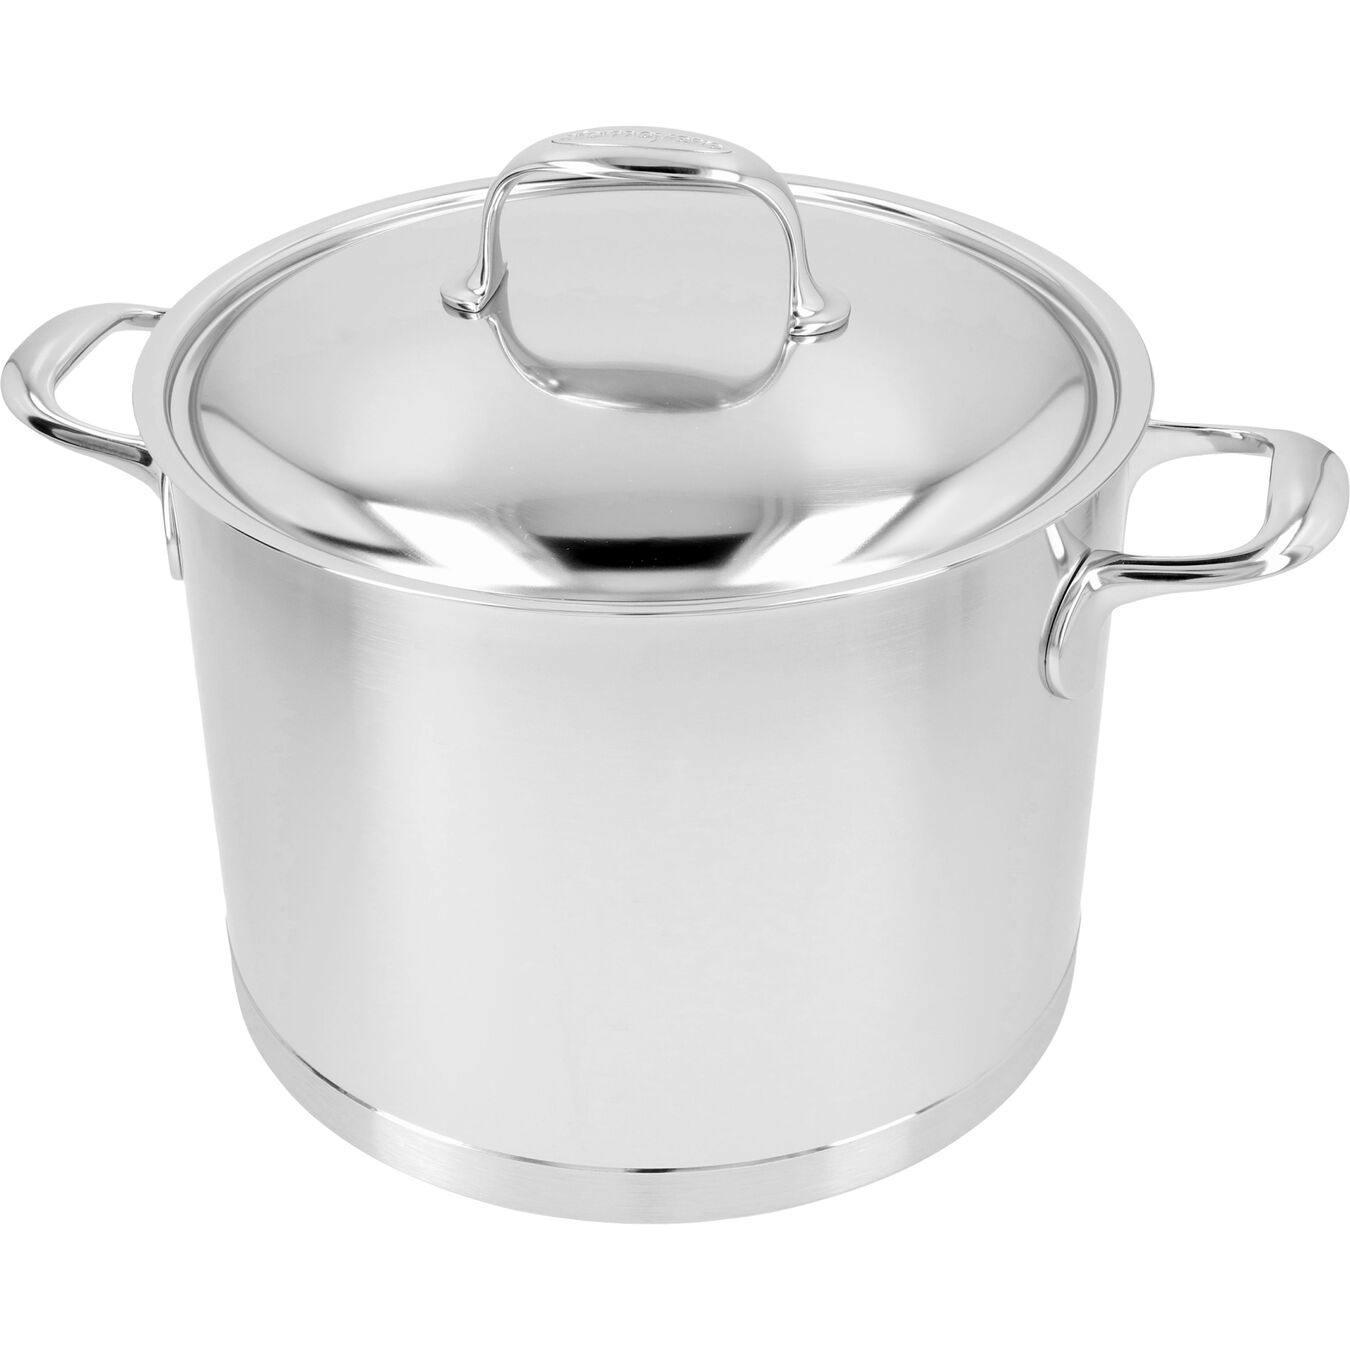 Demeyere Industry 5-Ply 8-qt Stainless Steel Stock Pot